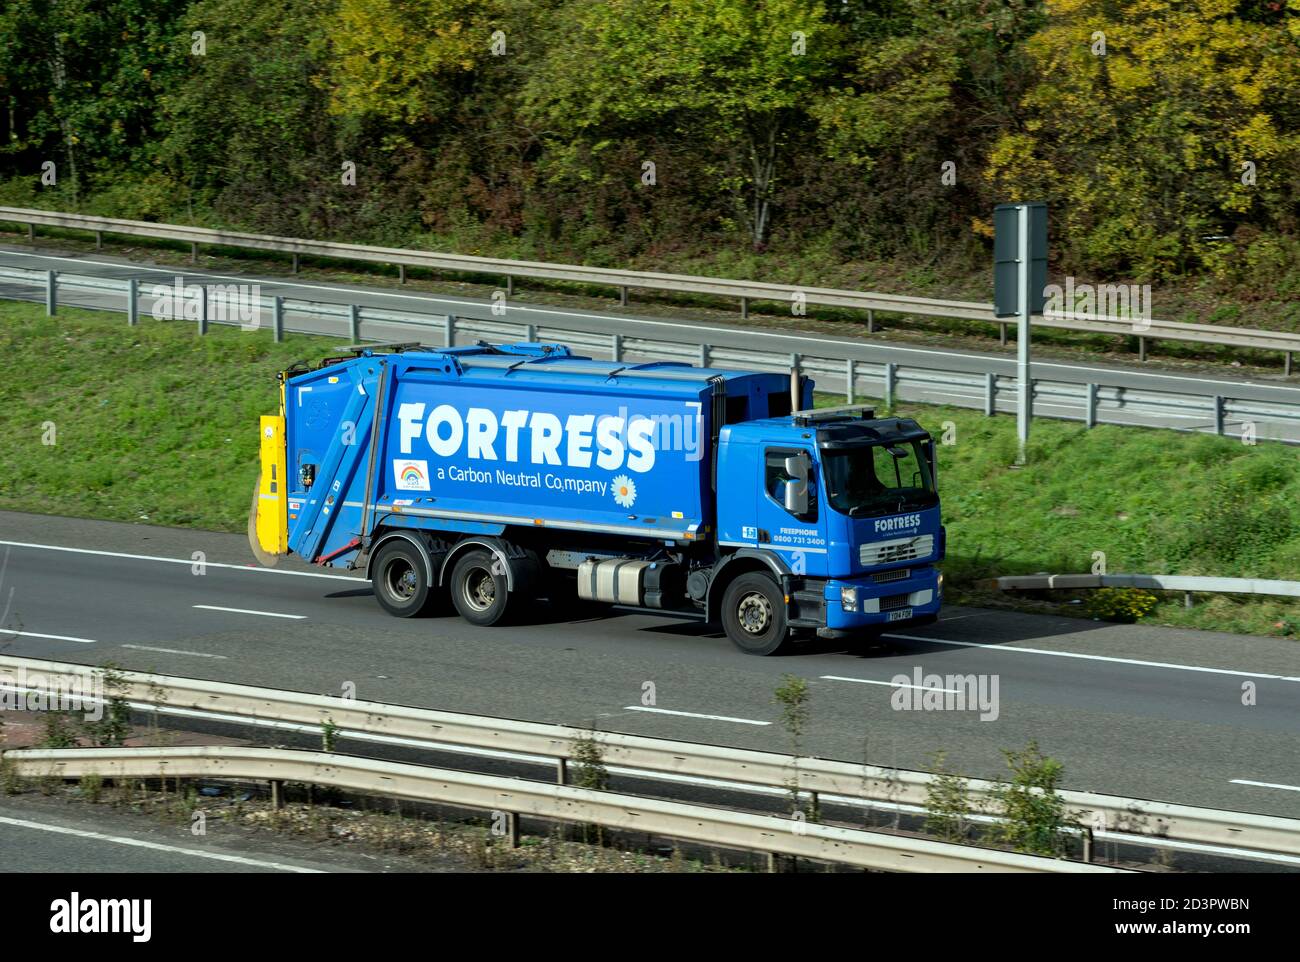 A Fortress lorry travelling on the M40 motorway, Warwickshire, UK Stock Photo